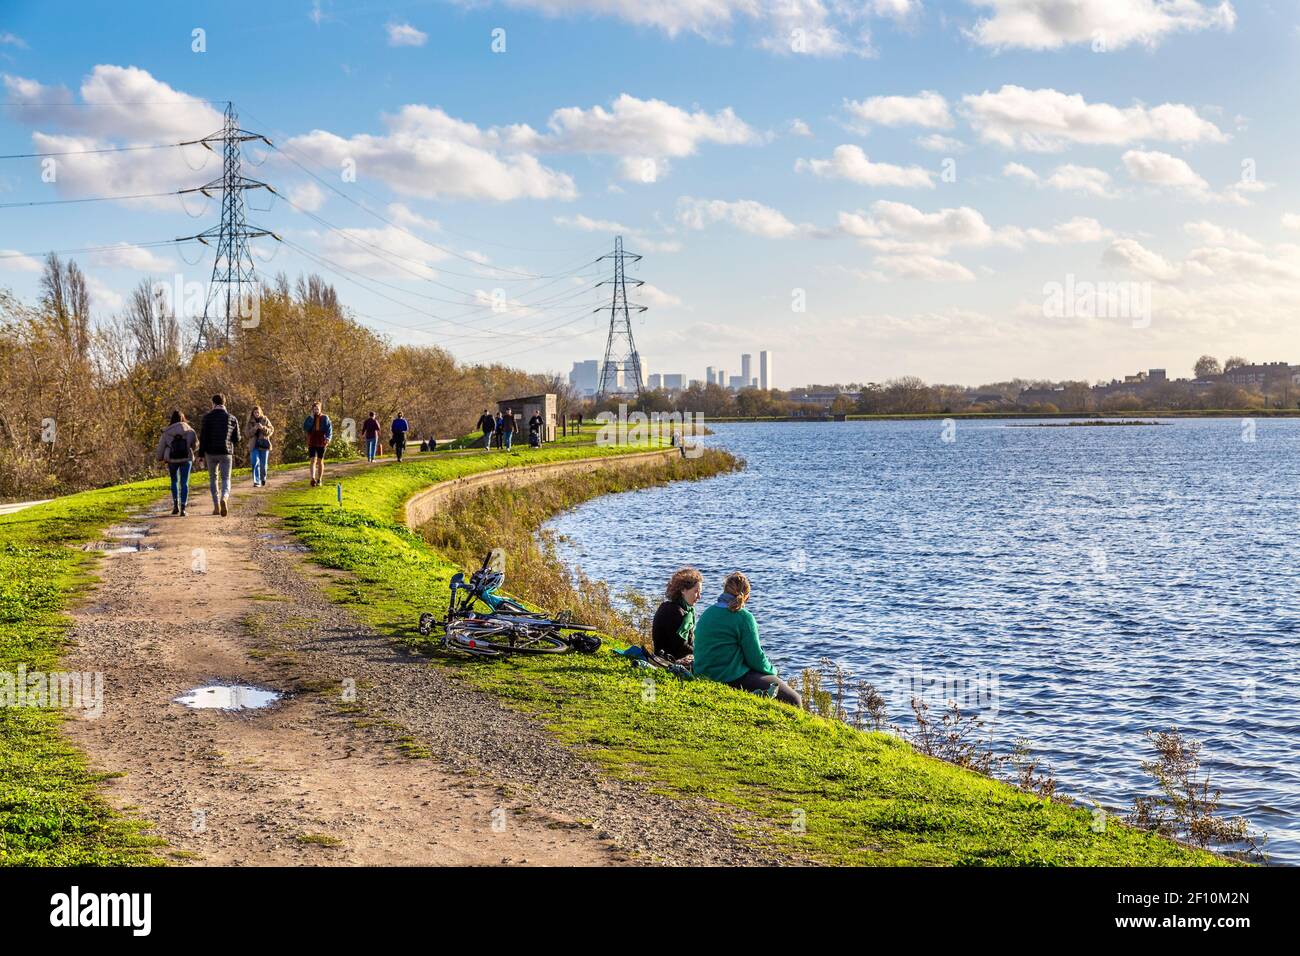 People walking and relaxing by the East Warwick Reservoir in Walthamstow Wetlands, Lea Valley Country Park, London, UK Stock Photo